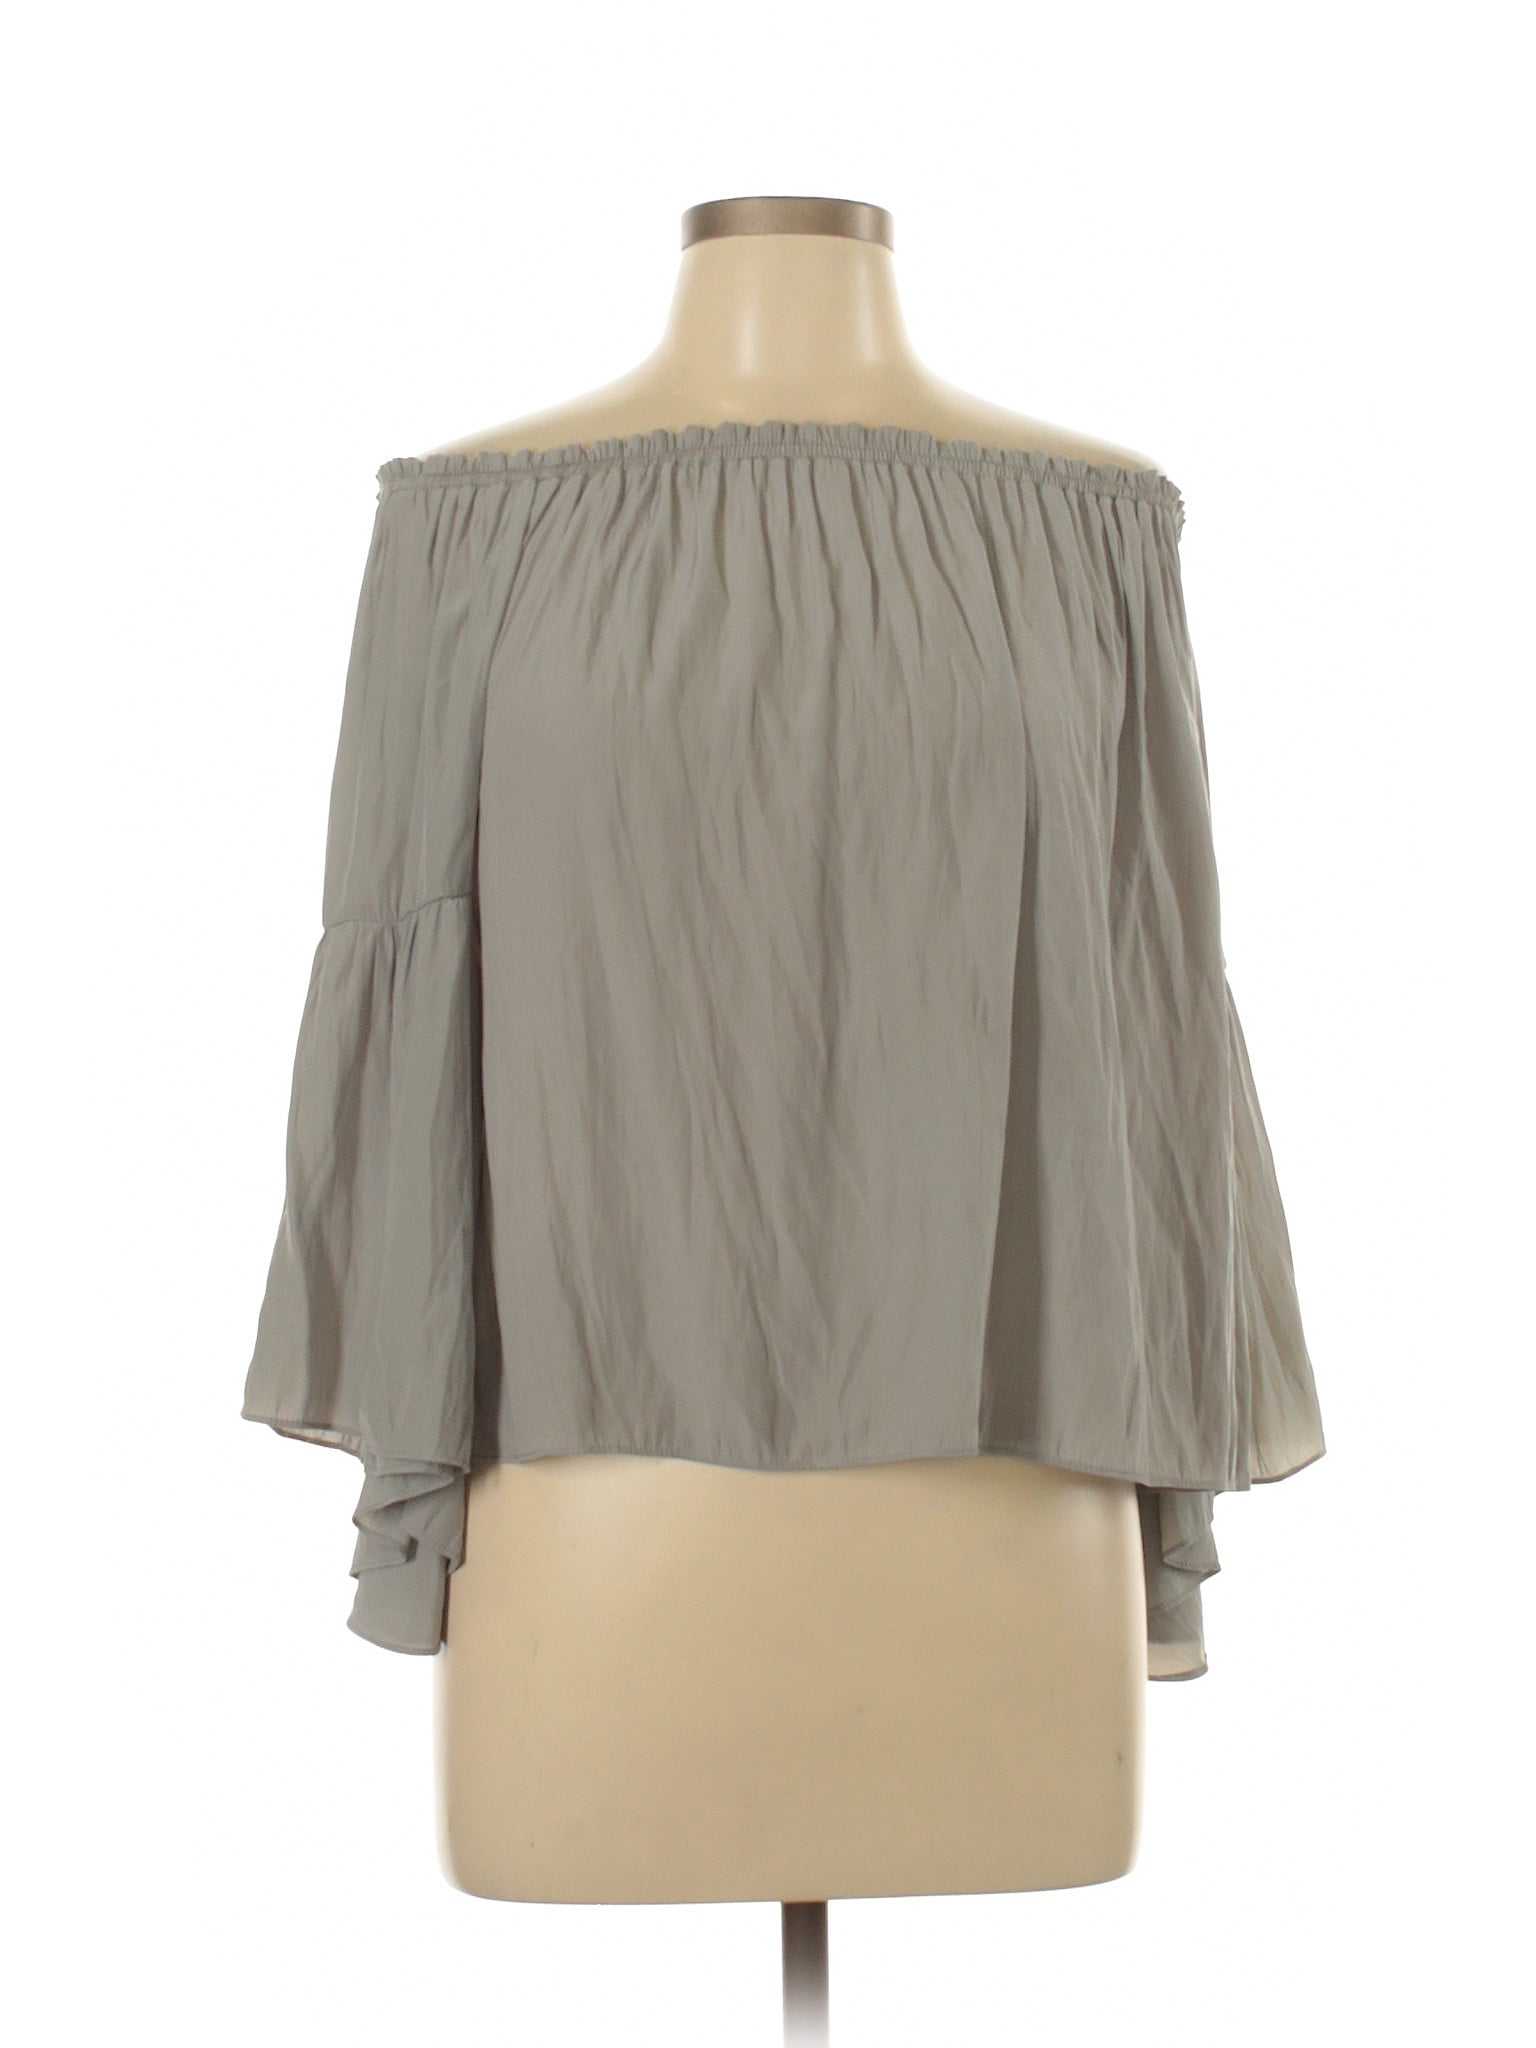 Lola & Sophie - Pre-Owned Lola & Sophie Women's Size XS 3/4 Sleeve ...